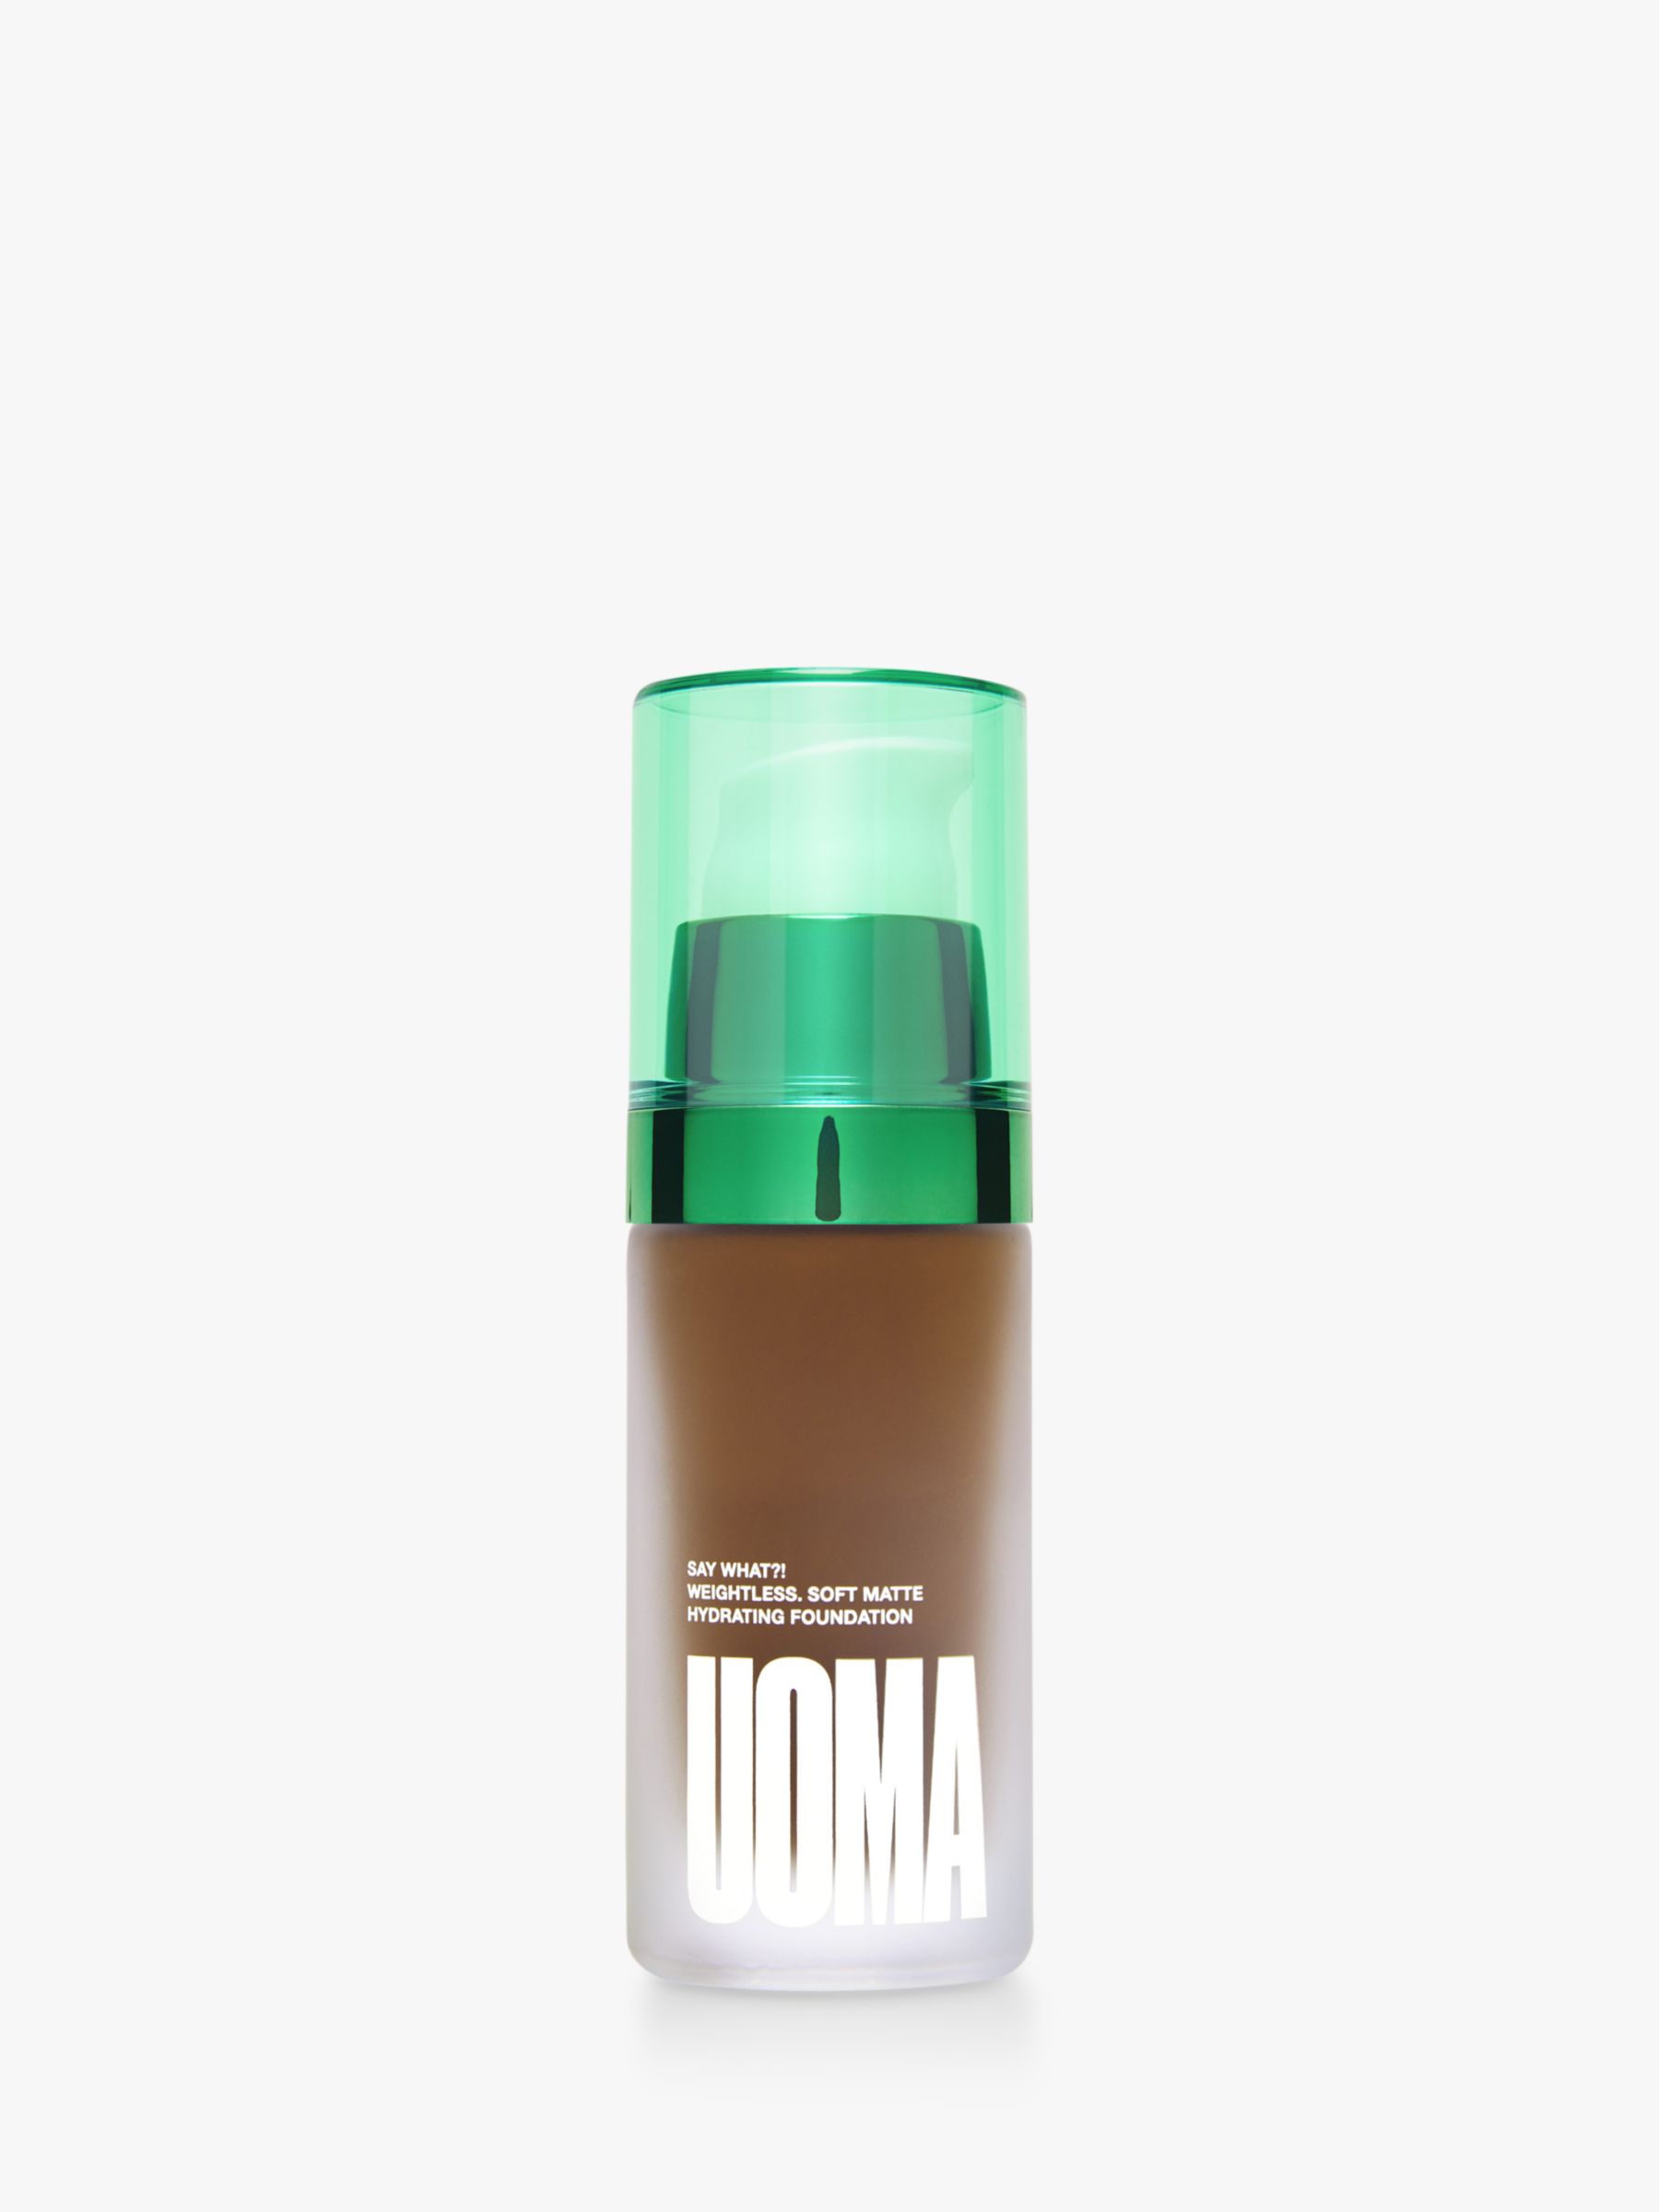 UOMA Beauty Say What?! Foundation, Black Pearl T1C